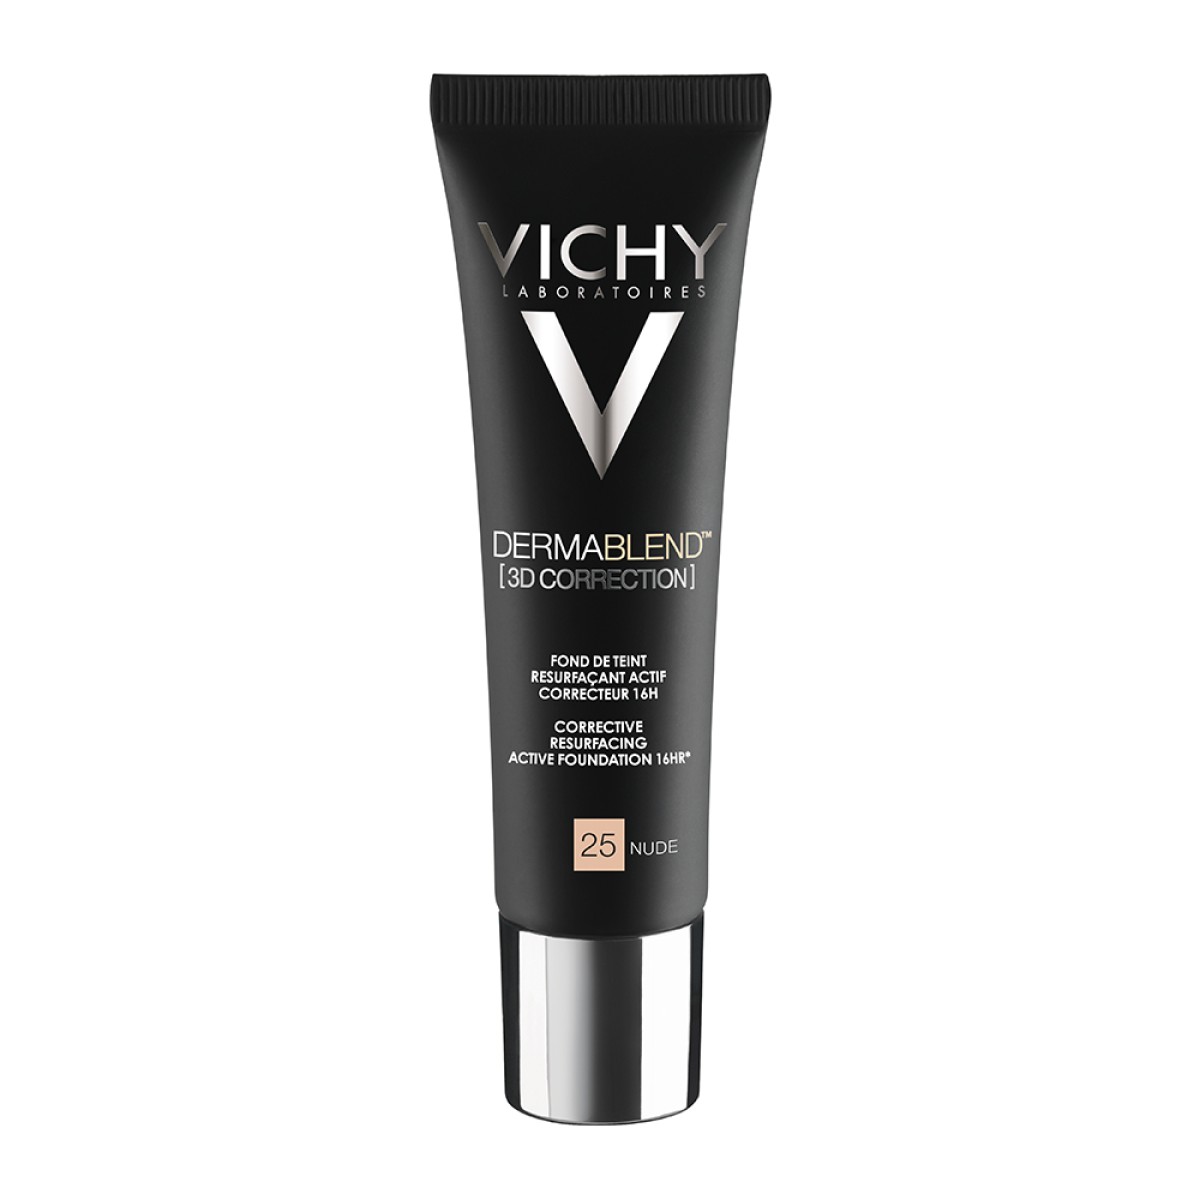 Vichy | Dermablend 3D Correction Make-up 25 Nude | 30ml